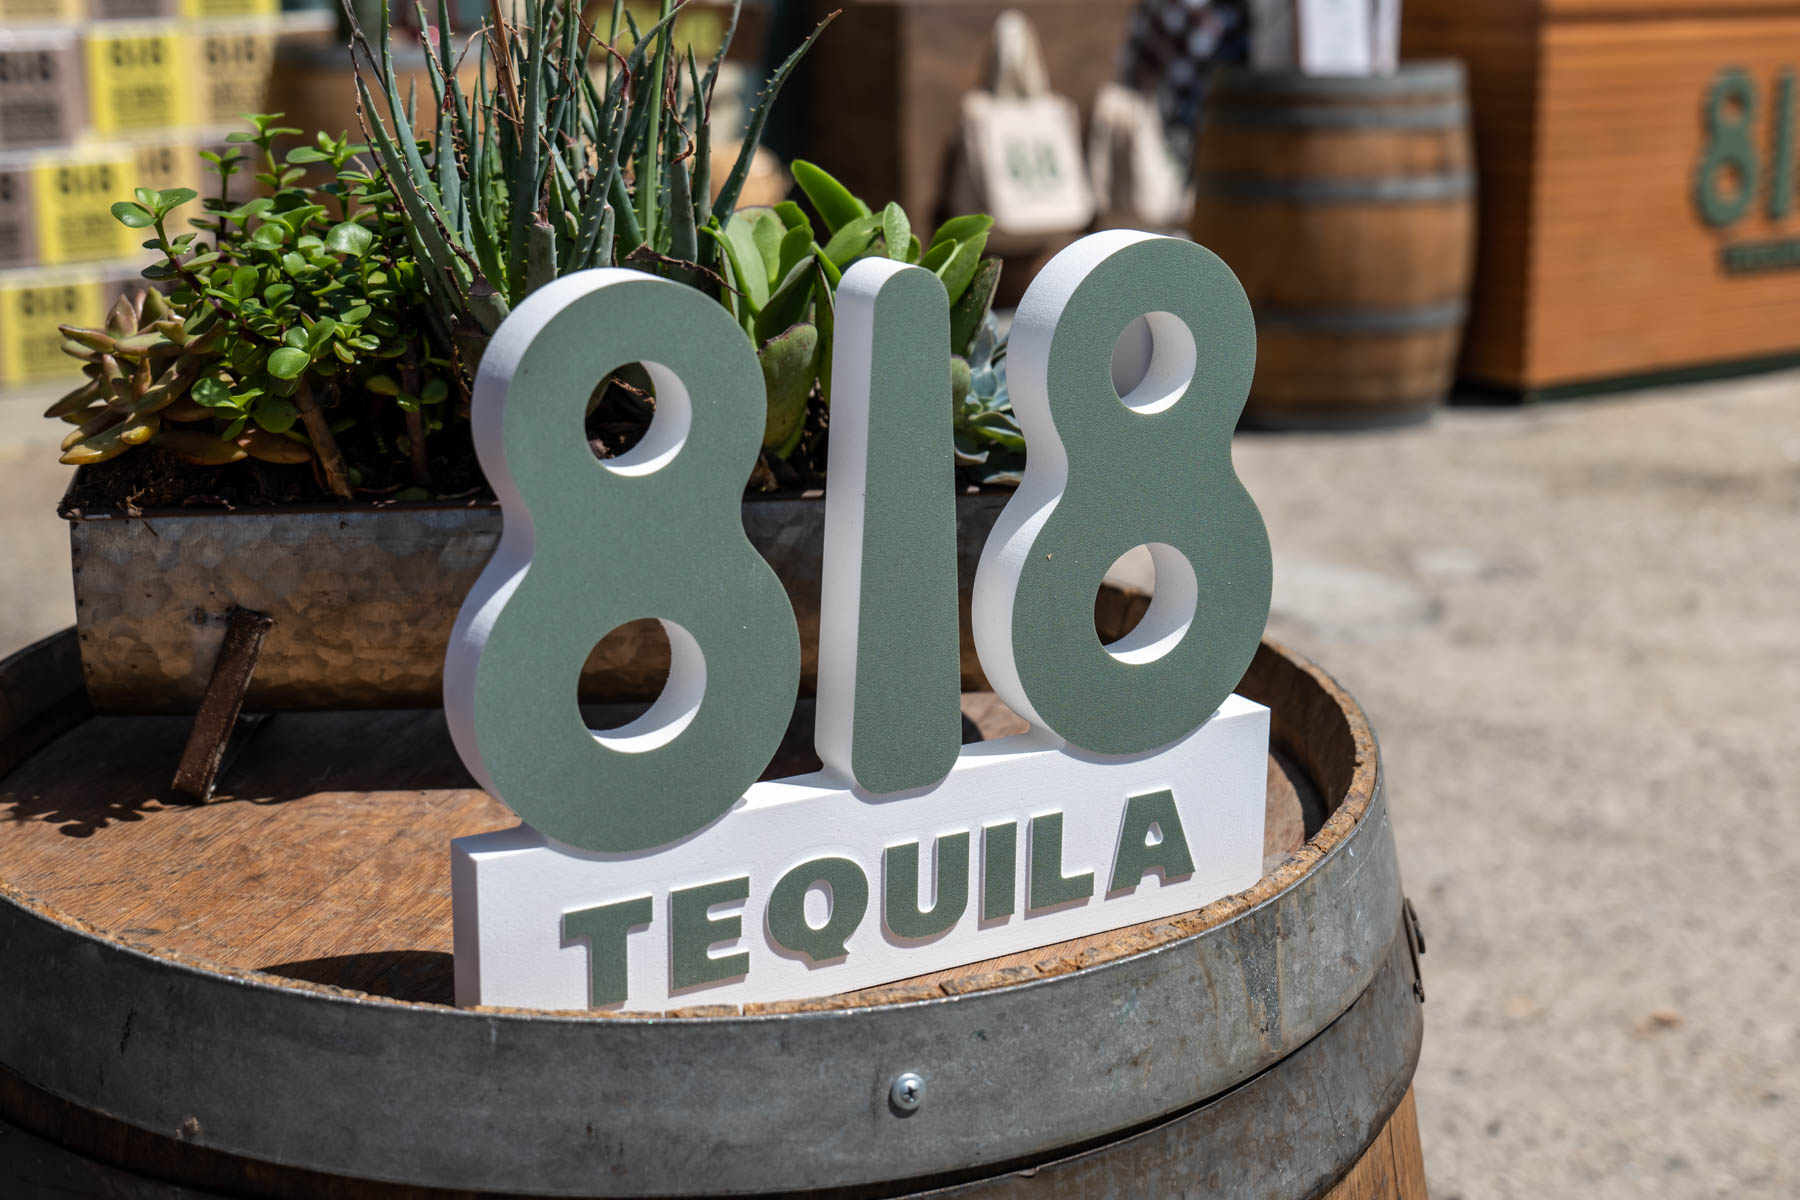 A close-up of a custom fabricated 818 Tequila logo cut-out.